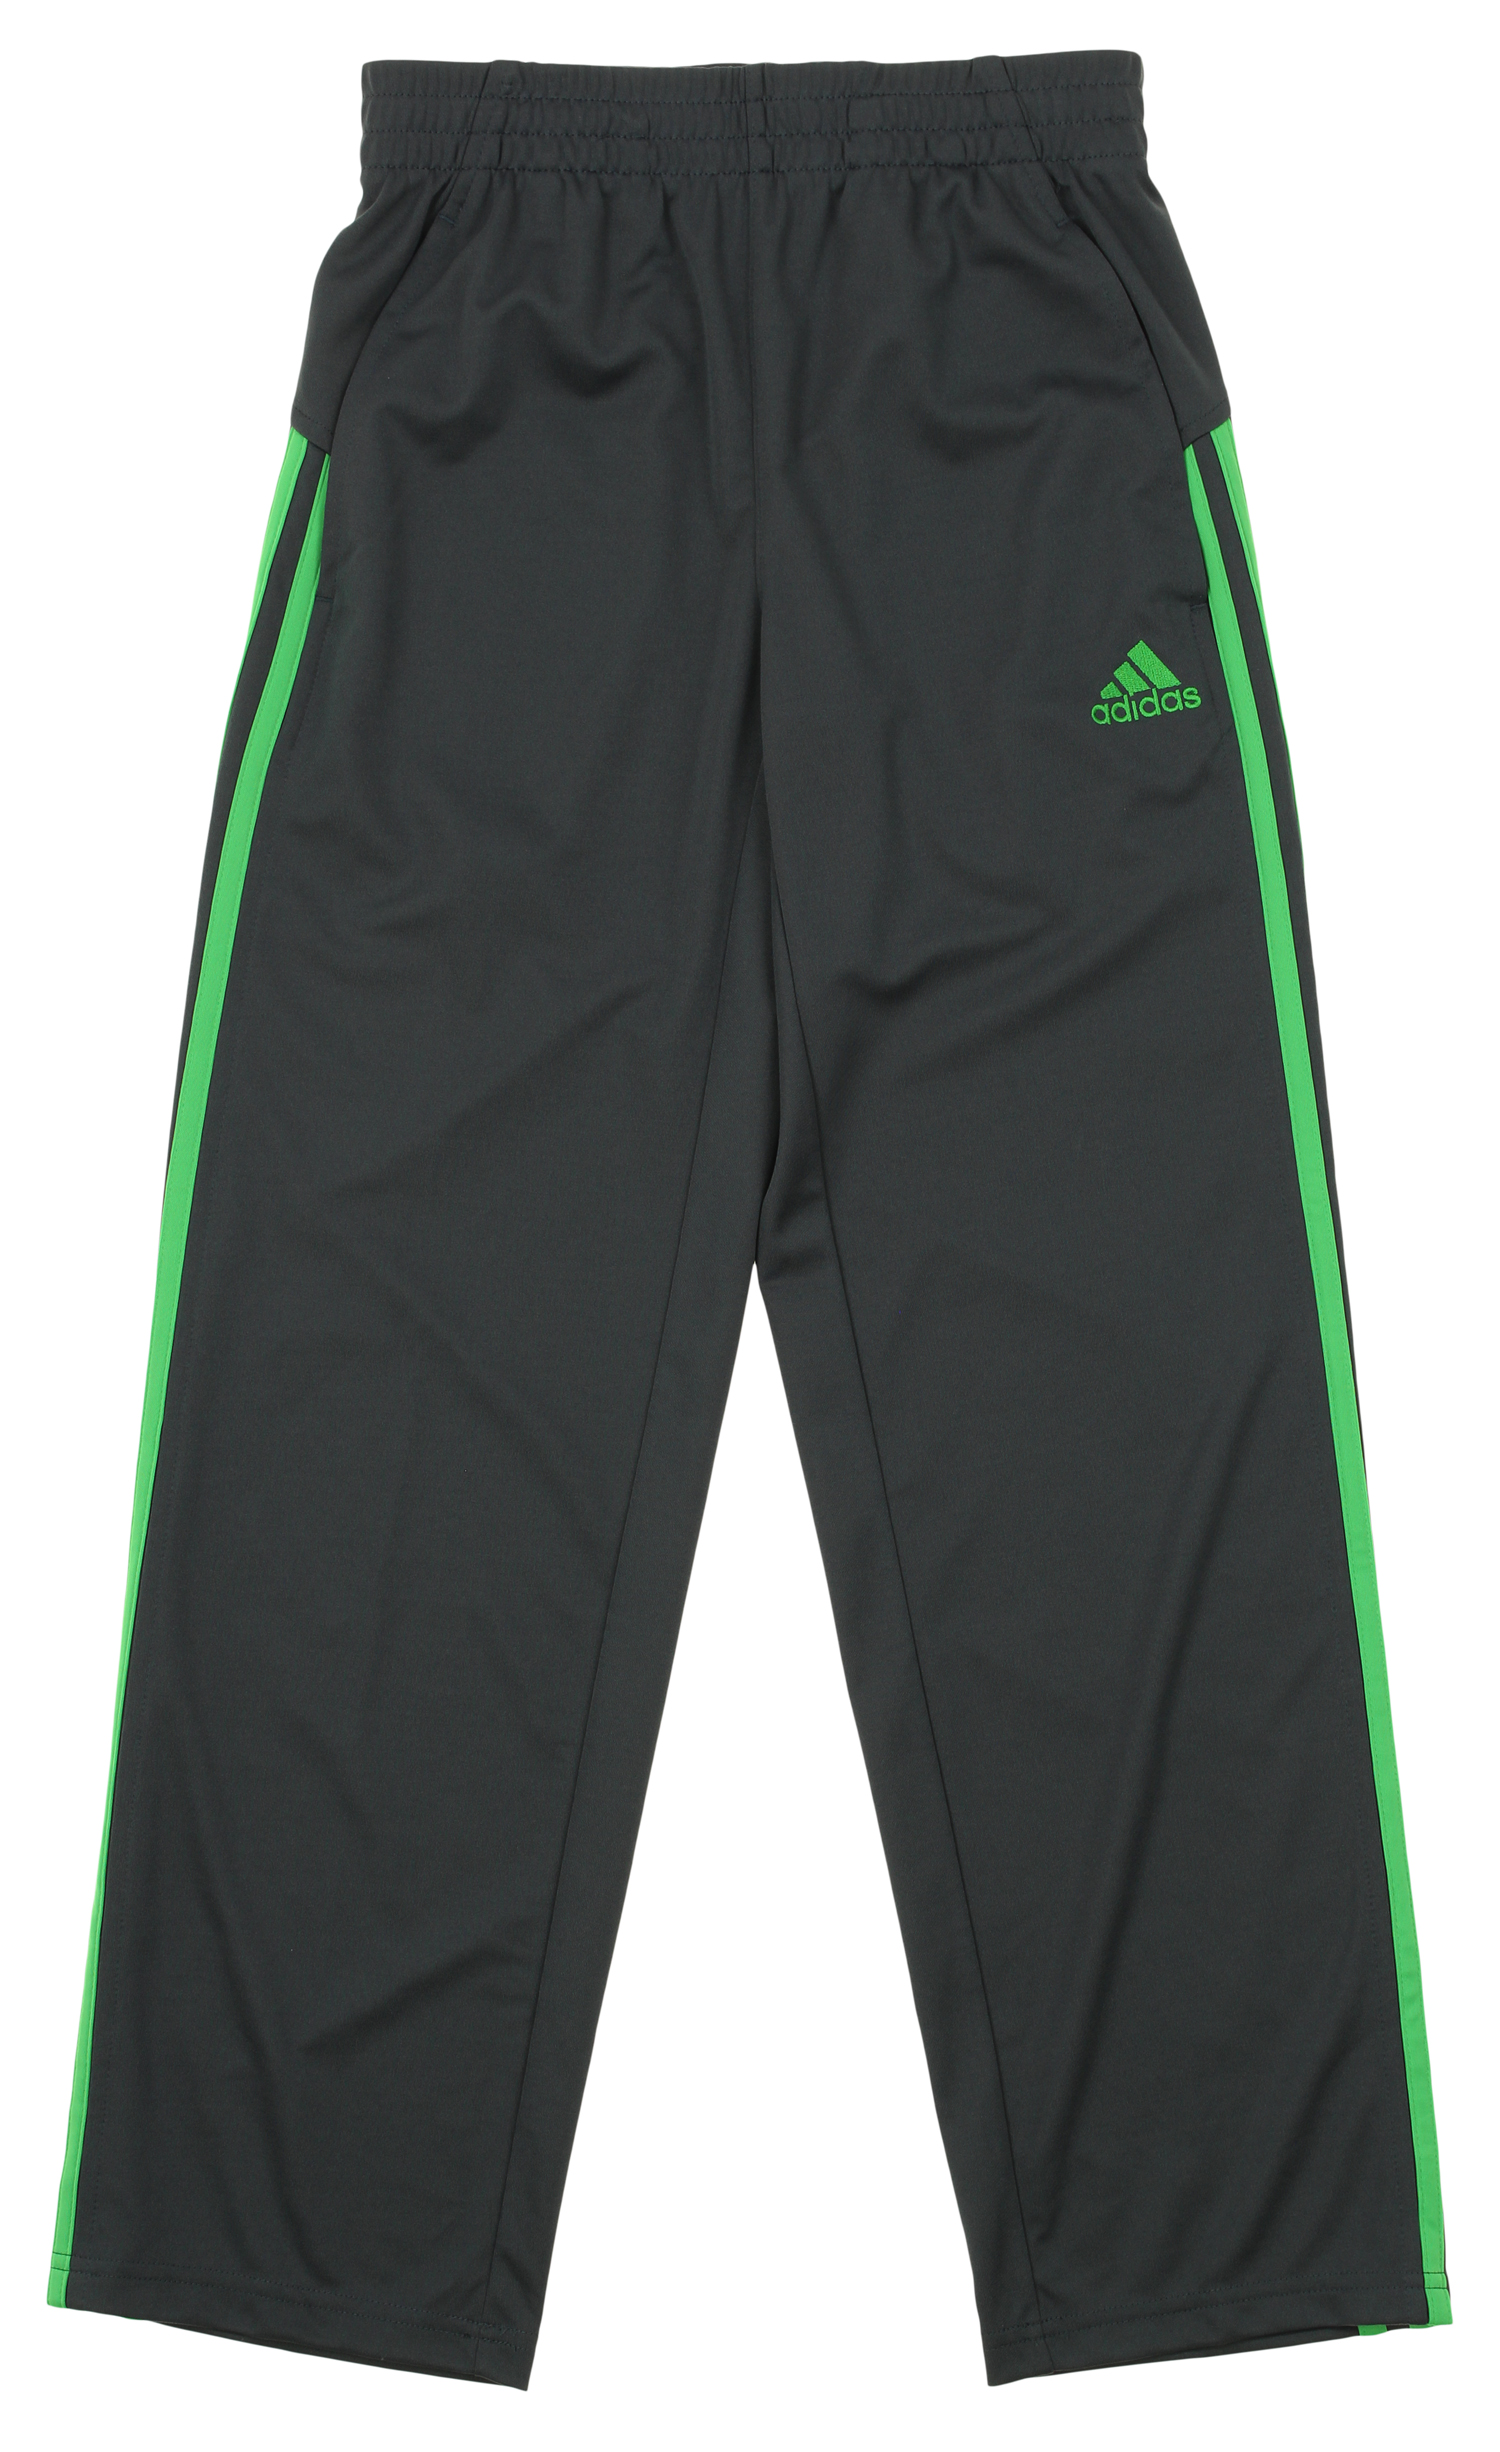 Adidas Youth Loose Core Athletic Pants, Grey / Lime Green | eBay